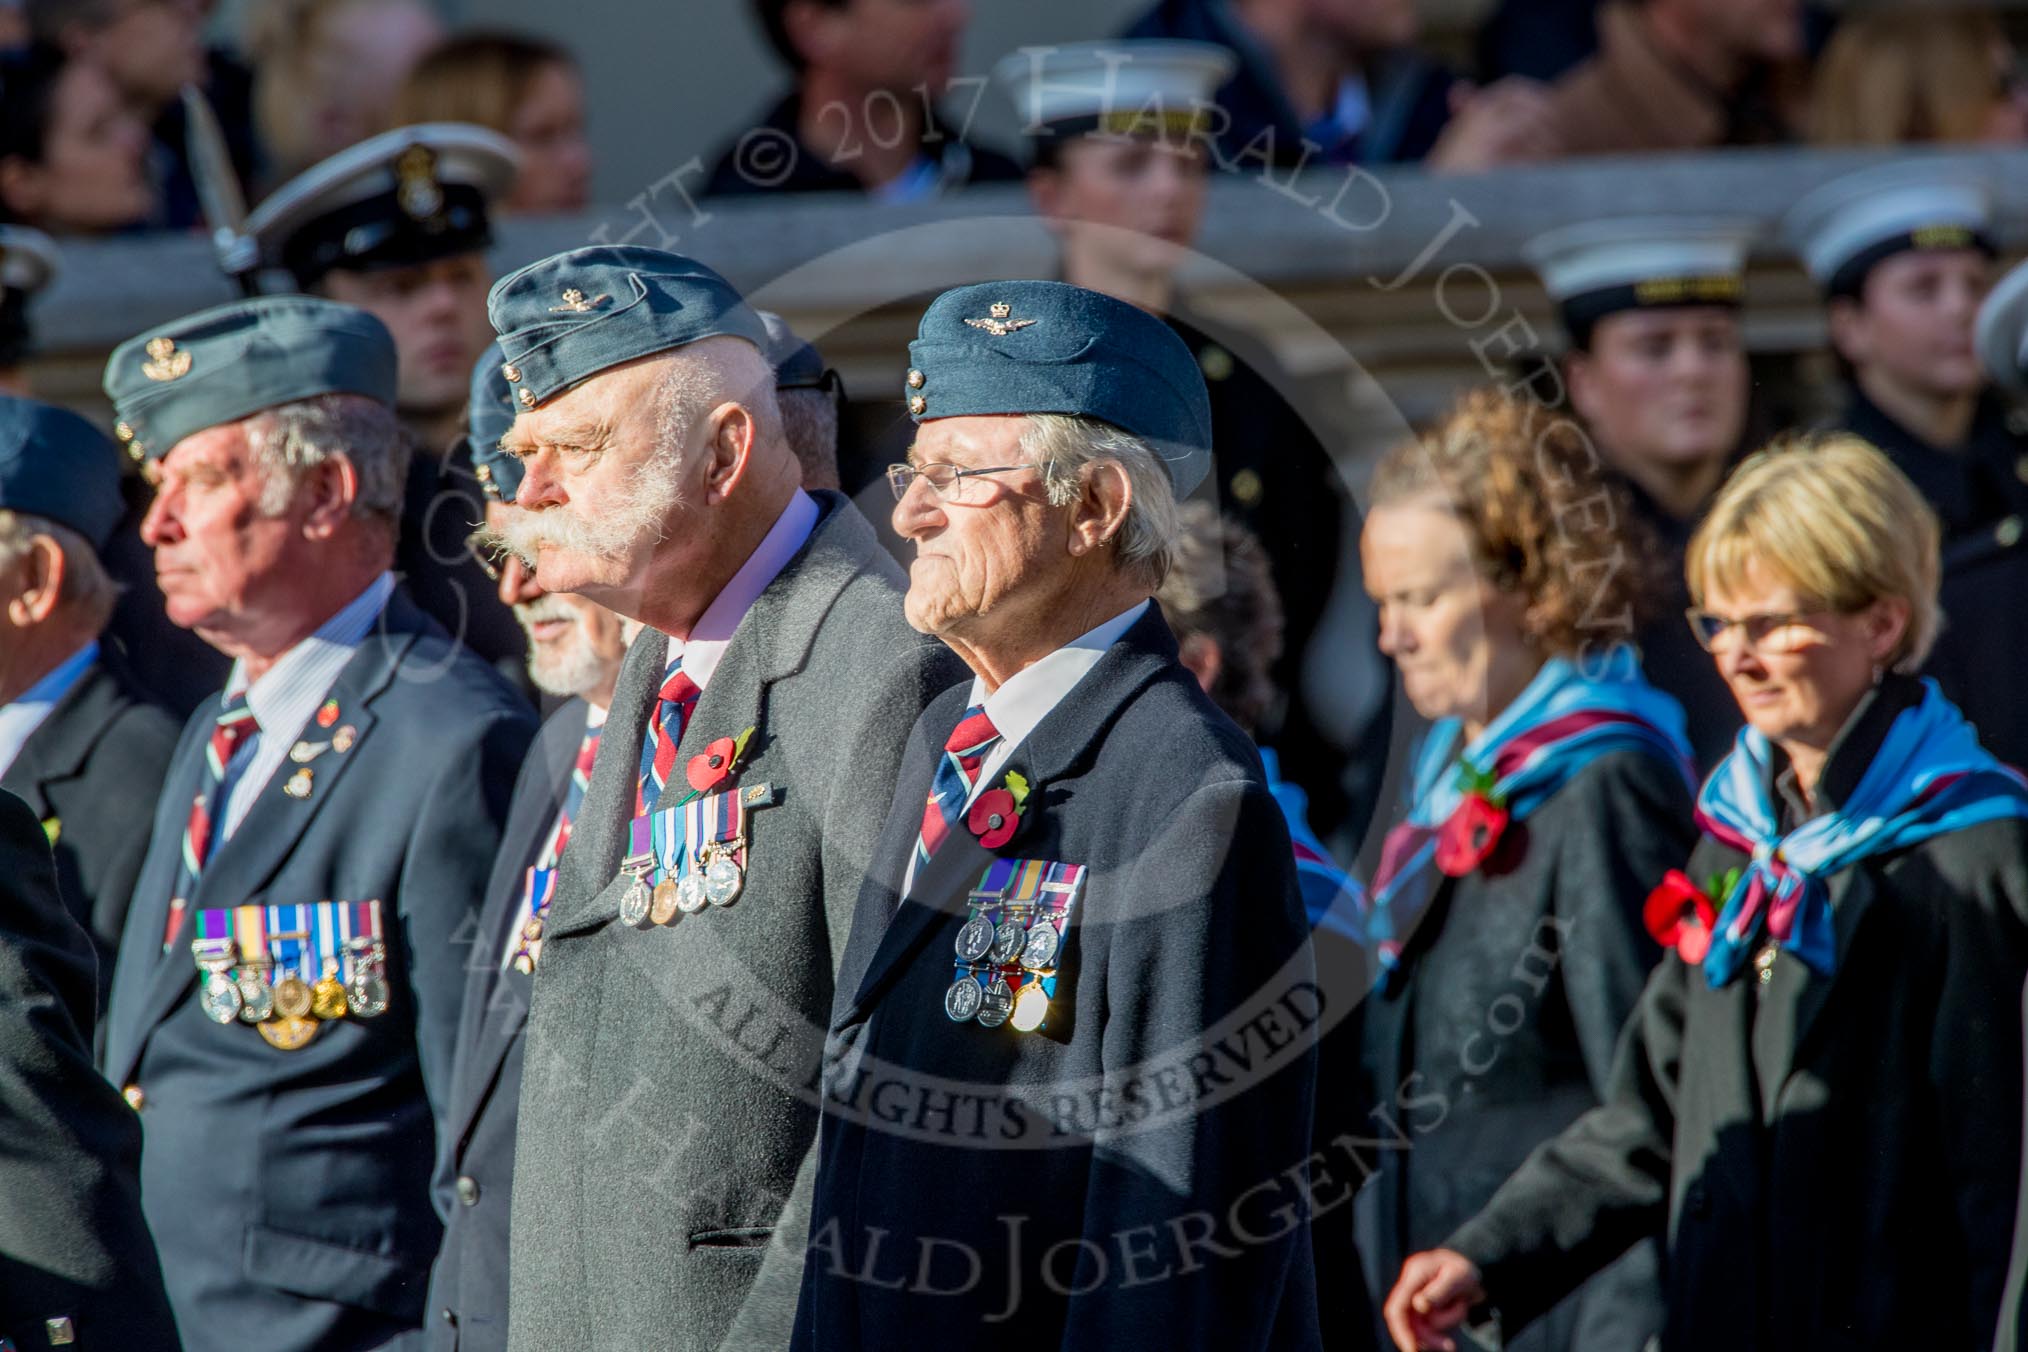 RAF Air Loadmasters Association (Group C21, 25 members) during the Royal British Legion March Past on Remembrance Sunday at the Cenotaph, Whitehall, Westminster, London, 11 November 2018, 12:17.